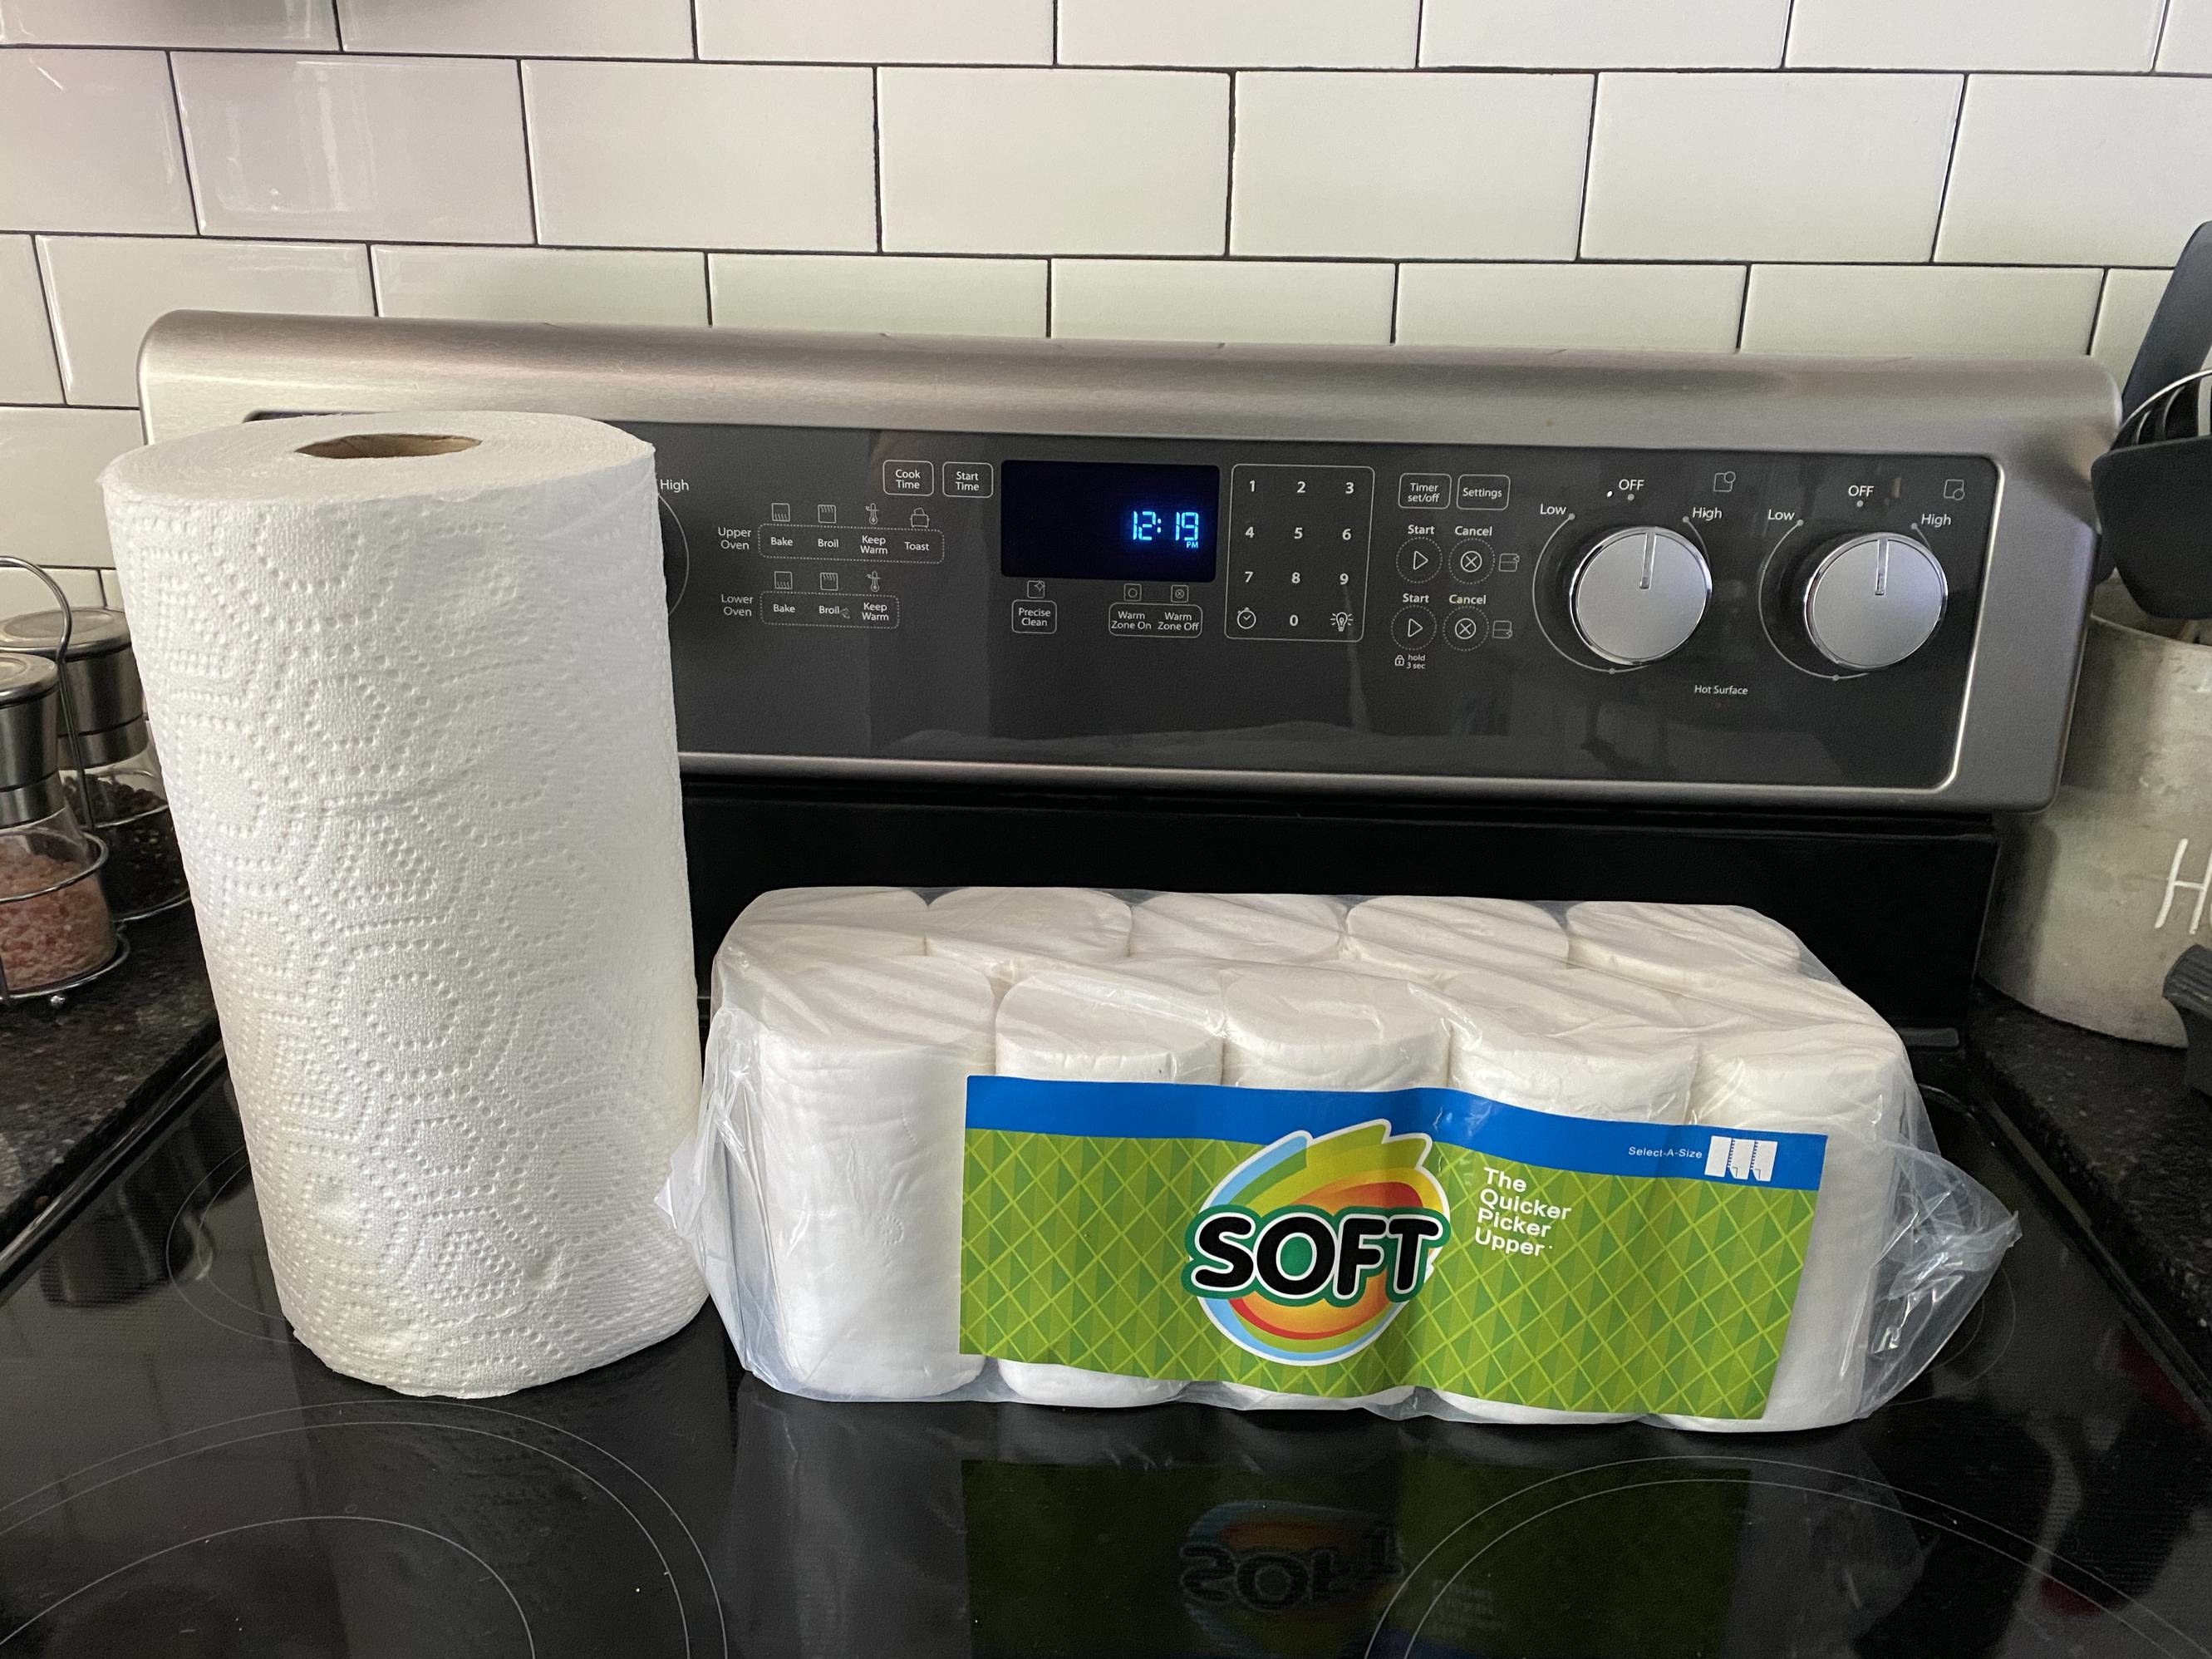 A normal sized roll of paper towels posed next to 10 ridiculously small rolls of paper towels.